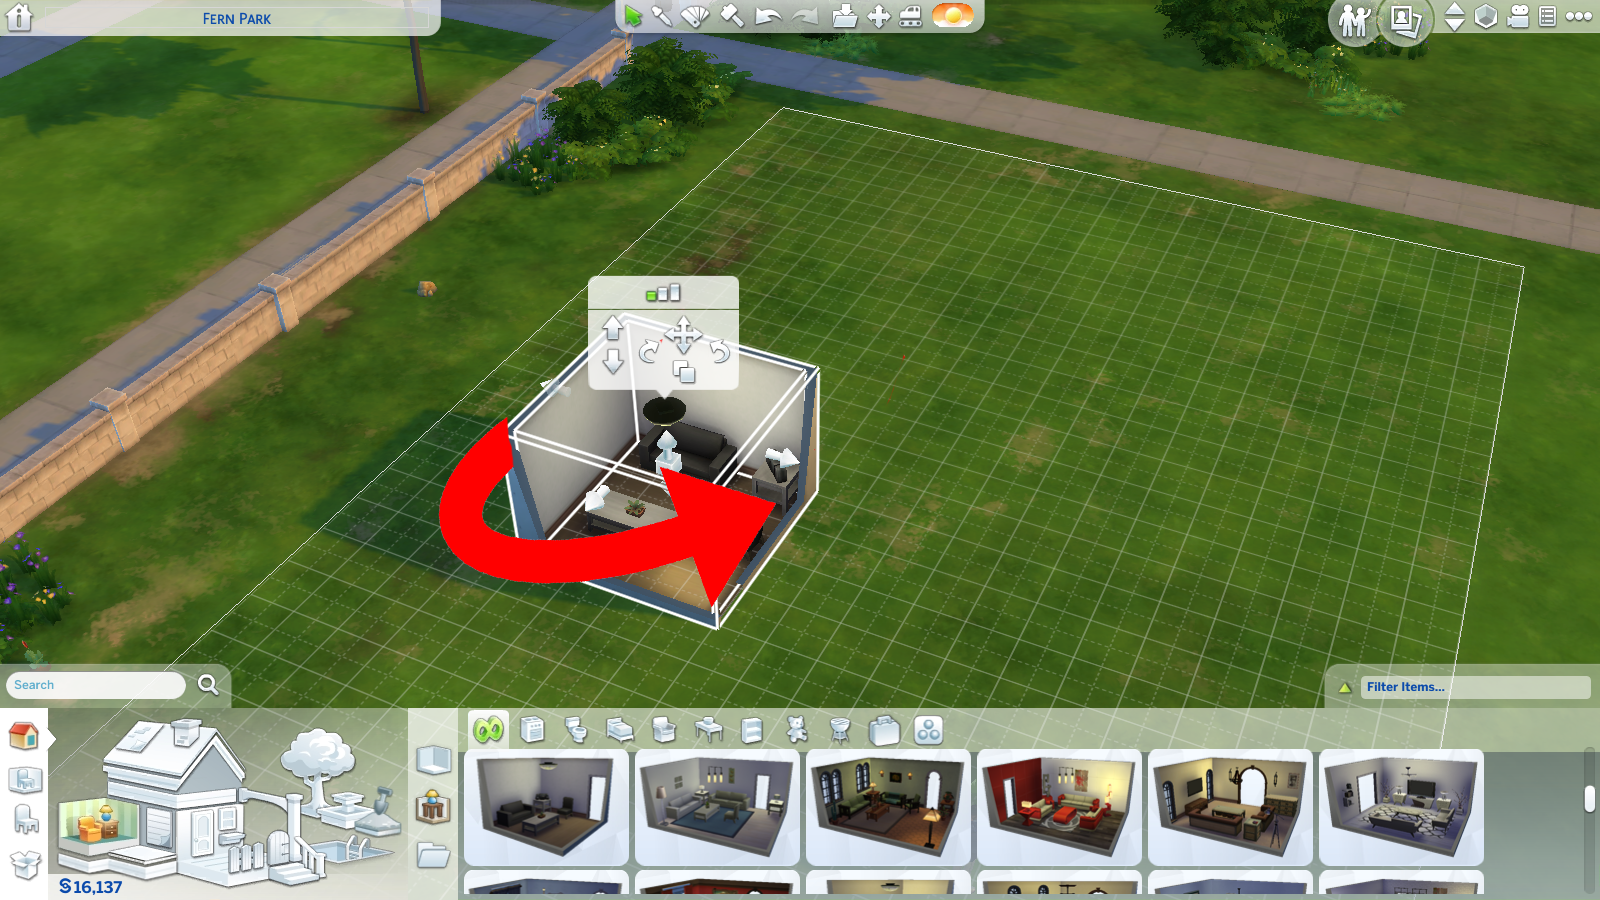 The Sims 4 Resize Objects Tutorial for PC & Consoles